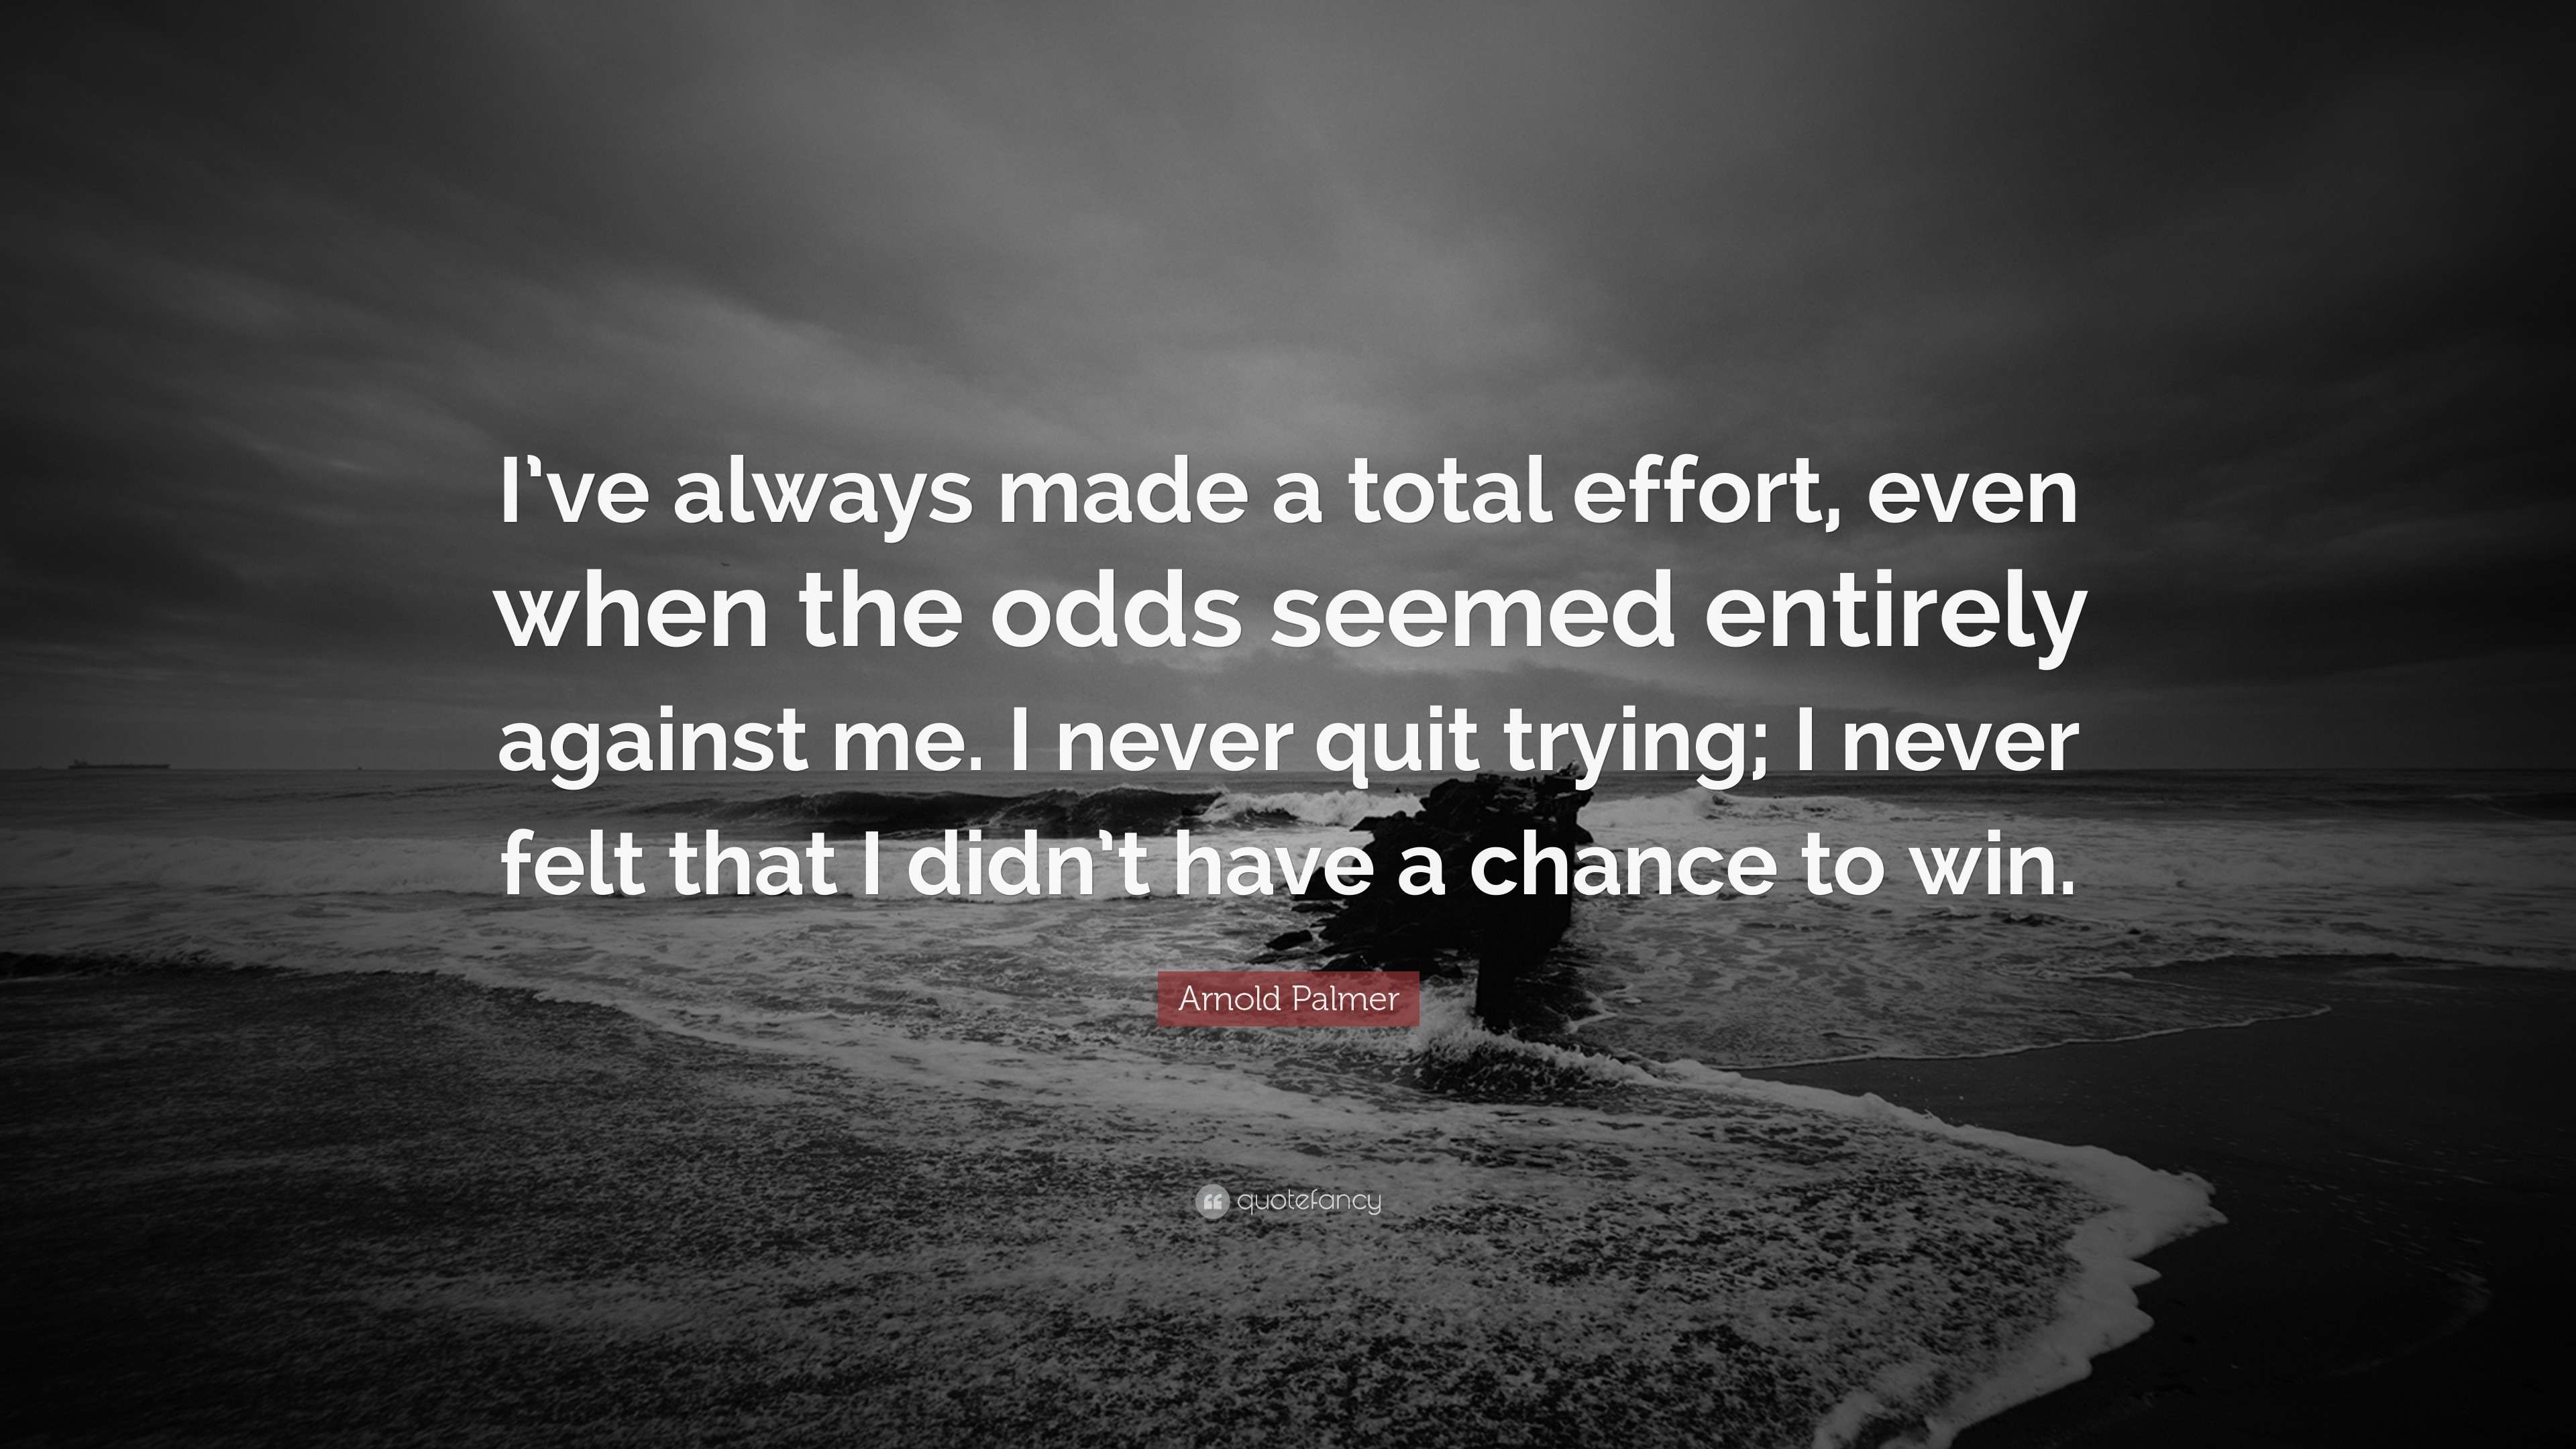 3840x2160 Arnold Palmer Quote: “I've always made a total effort, even when